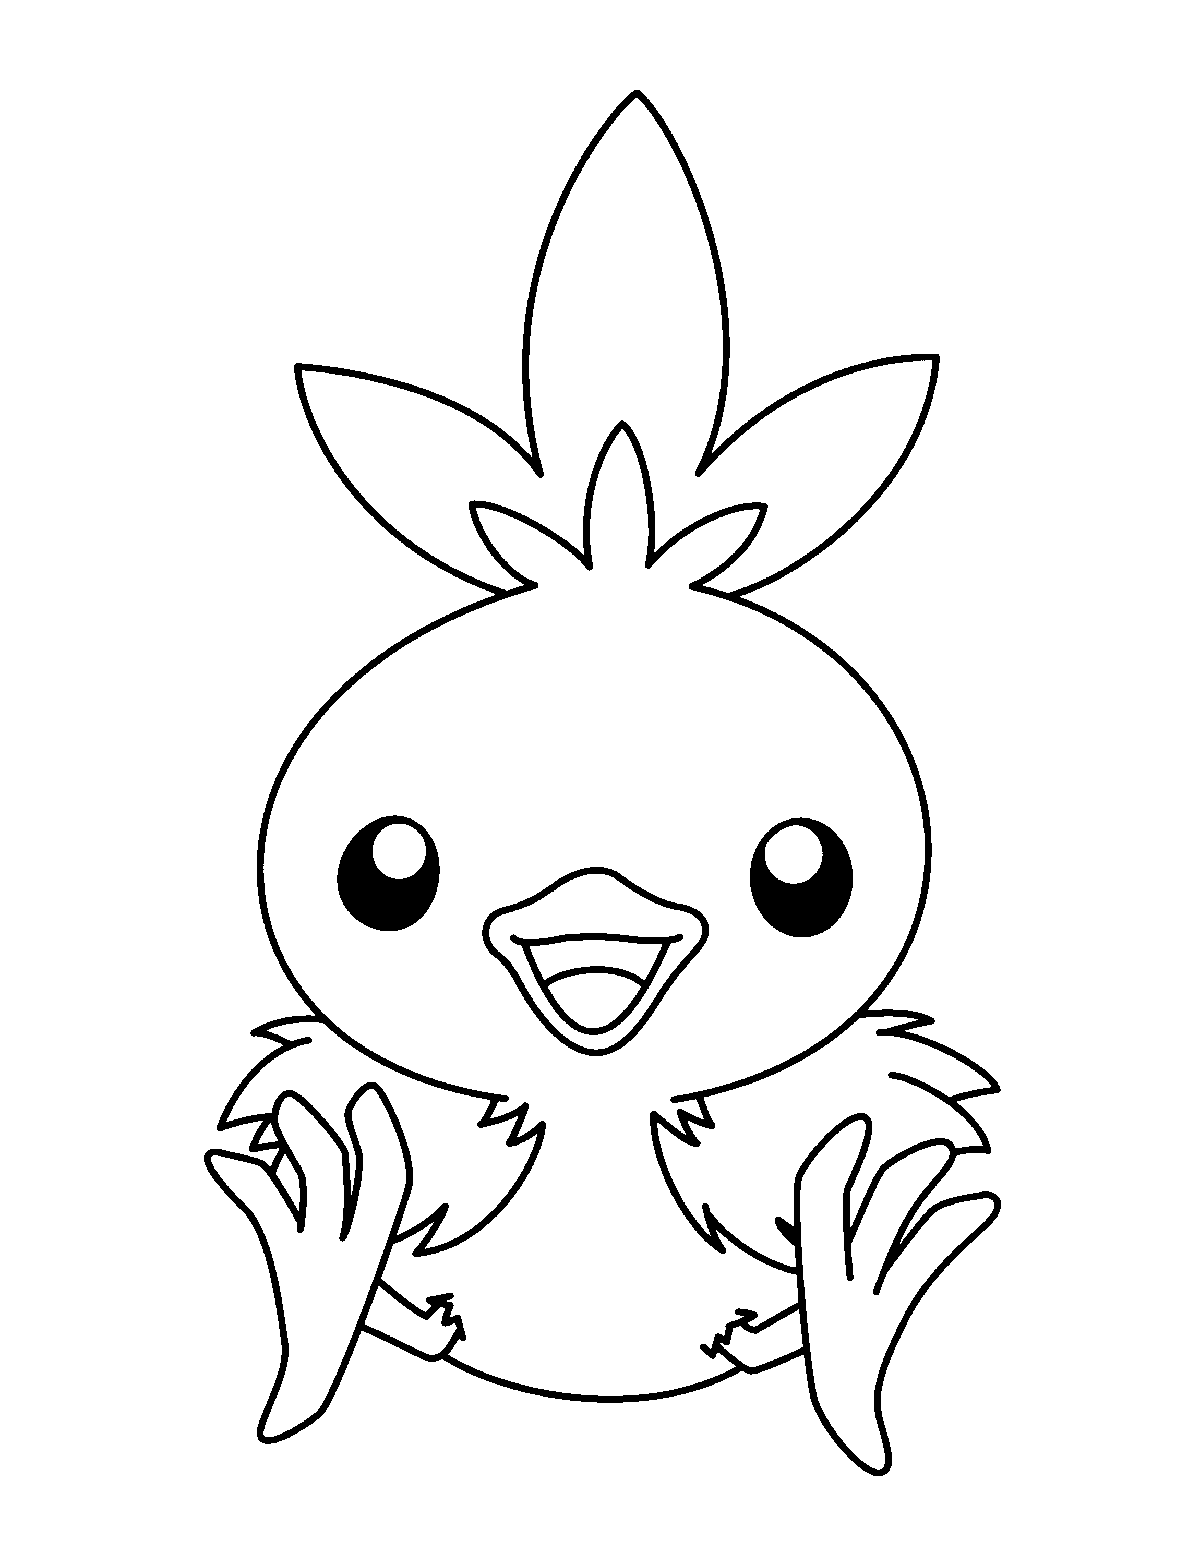 Pokemon Torchic Coloring Page - Free Printable Coloring Pages for Kids